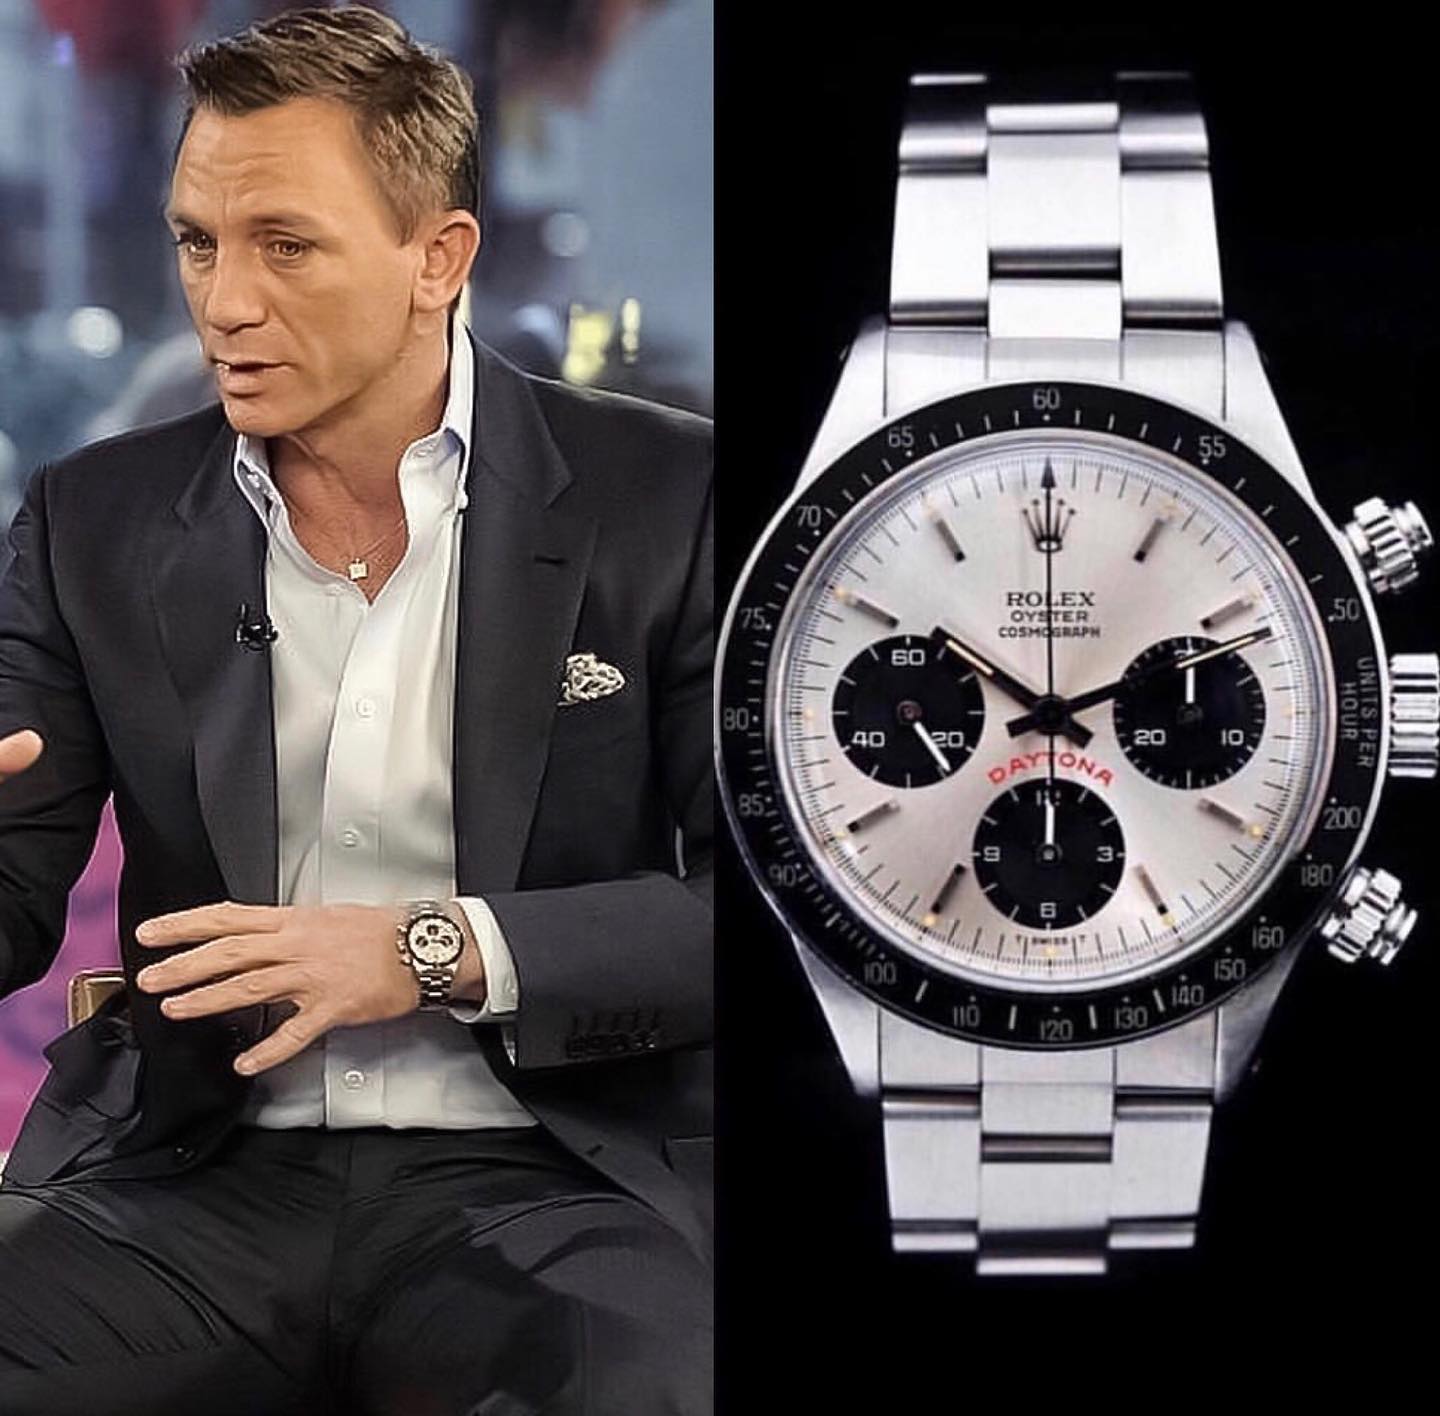 Daniel Craig likes to wear a vintage Rolex Daytona Panda Big Red 6263 on his spare time. The Omegas are for the other guy. Bond something... ðŸ¤” ï¸� 70,000 ðŸ“¸ @superwatchman